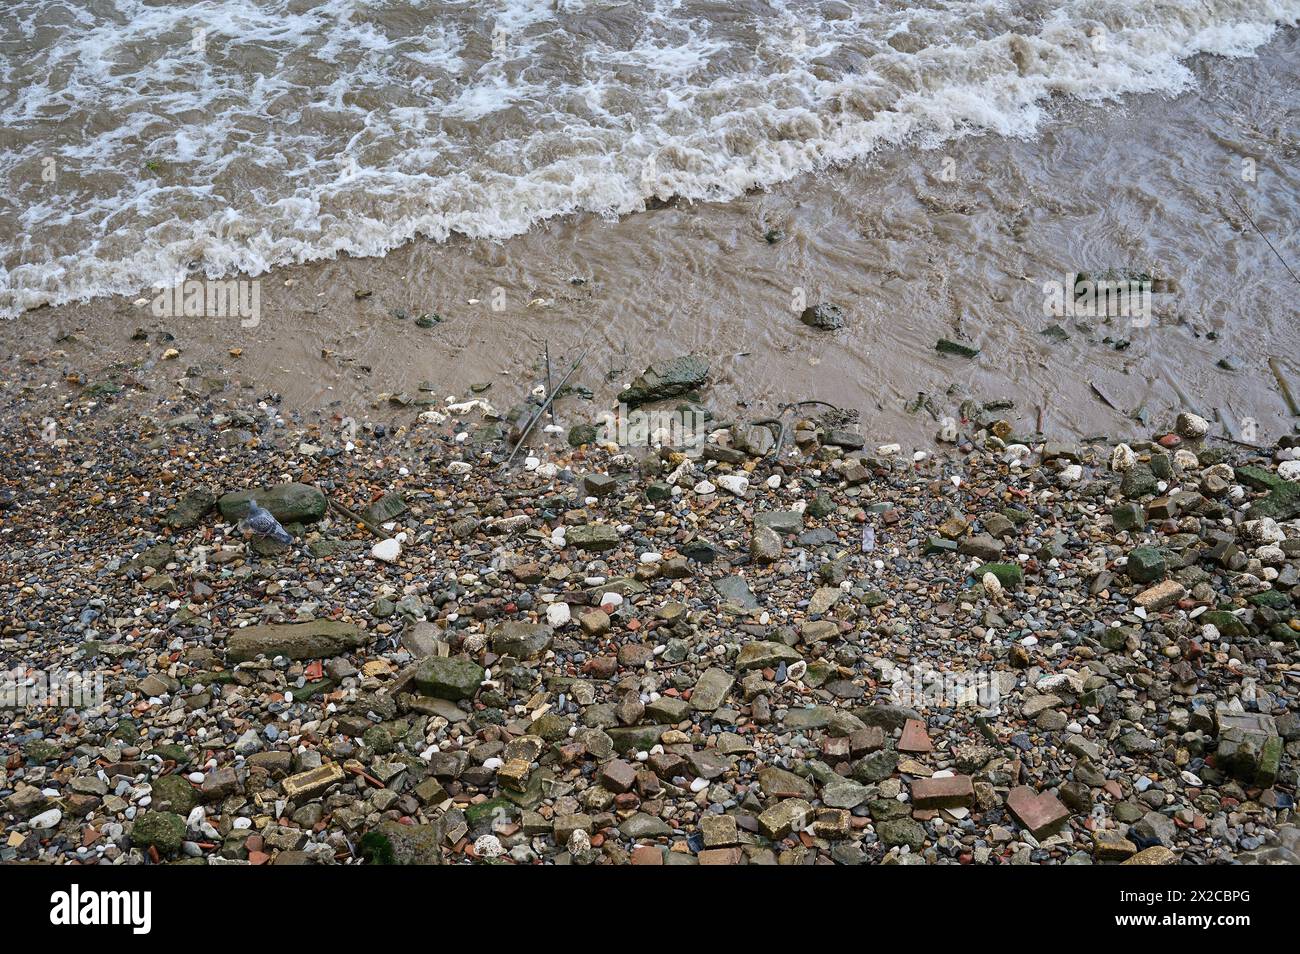 Looking down at small waves breaking on rocks and stones on river bank at low tide Stock Photo